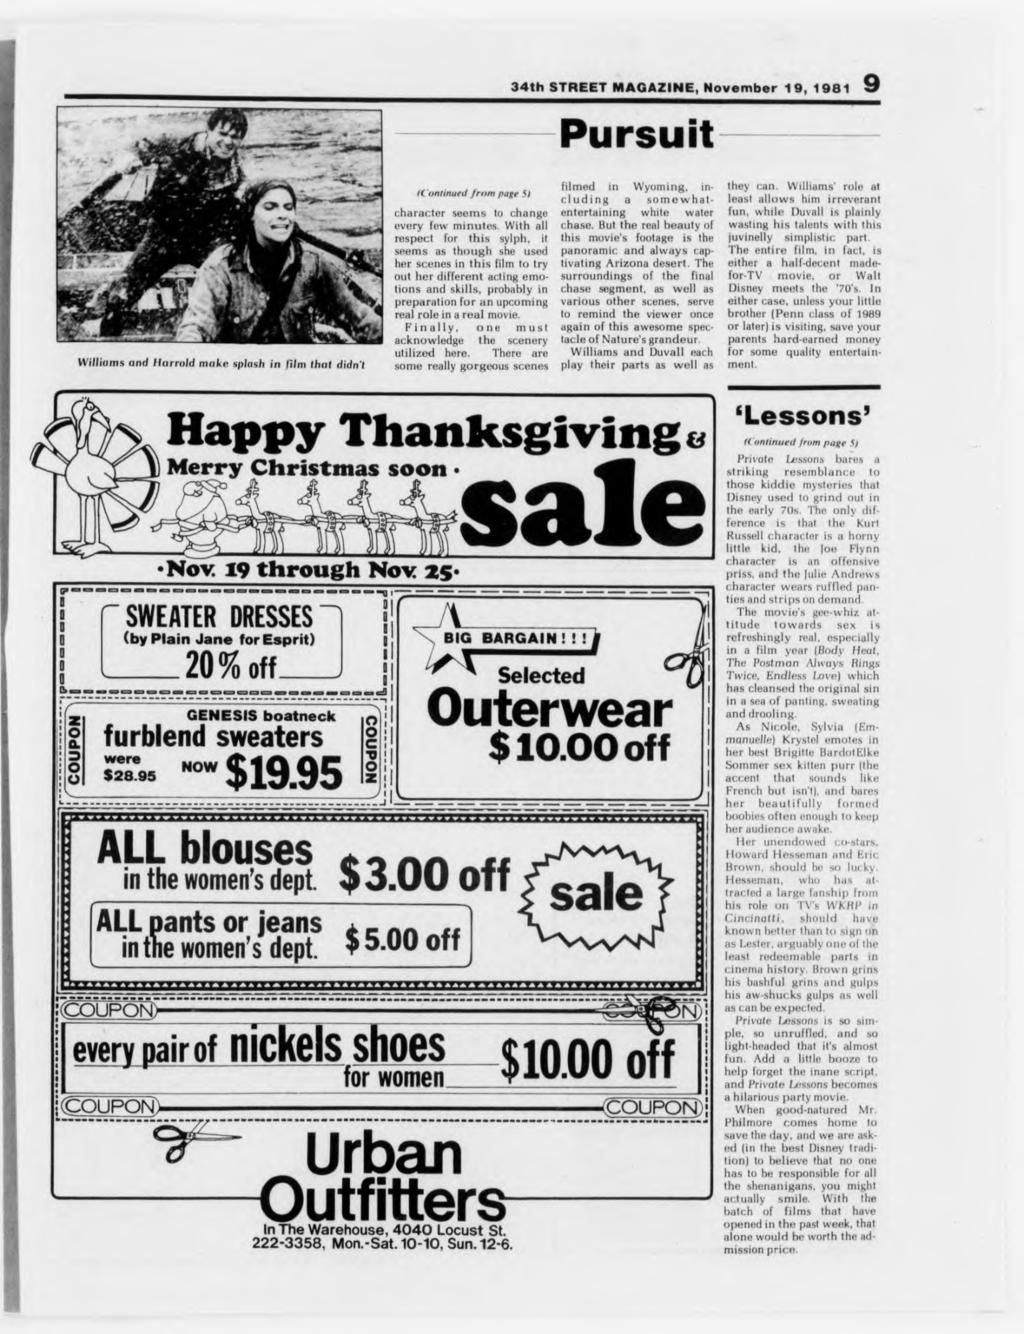 34th STREET MAGAZINE, November 19, 1981 Pursuit Williams and Horrald make splosh in film thai didn't ( onlinueil from page St character seems to change every few minutes.